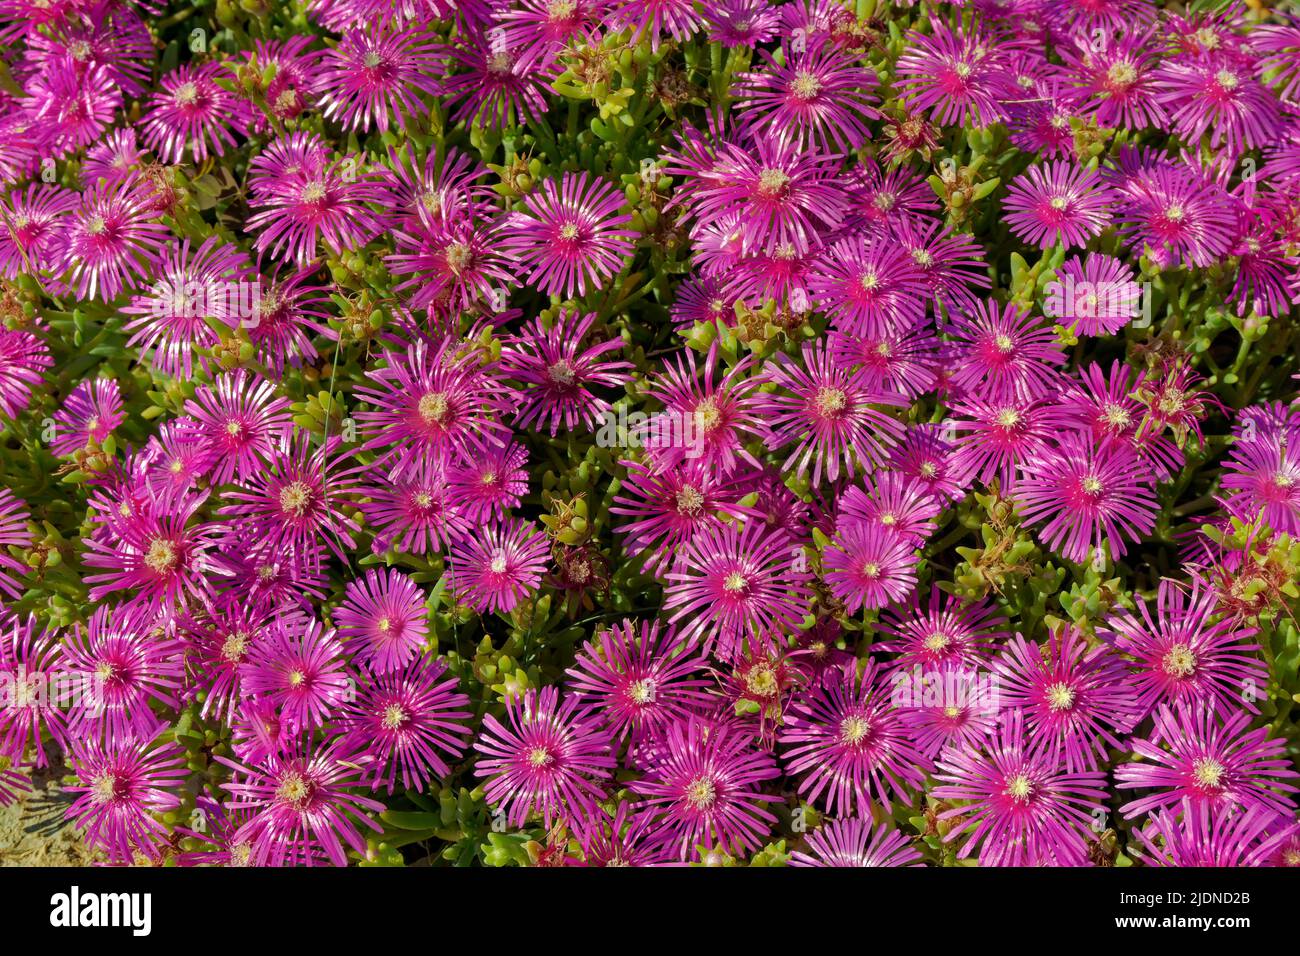 Flowers of the Lampranthus succulent plant. Stock Photo